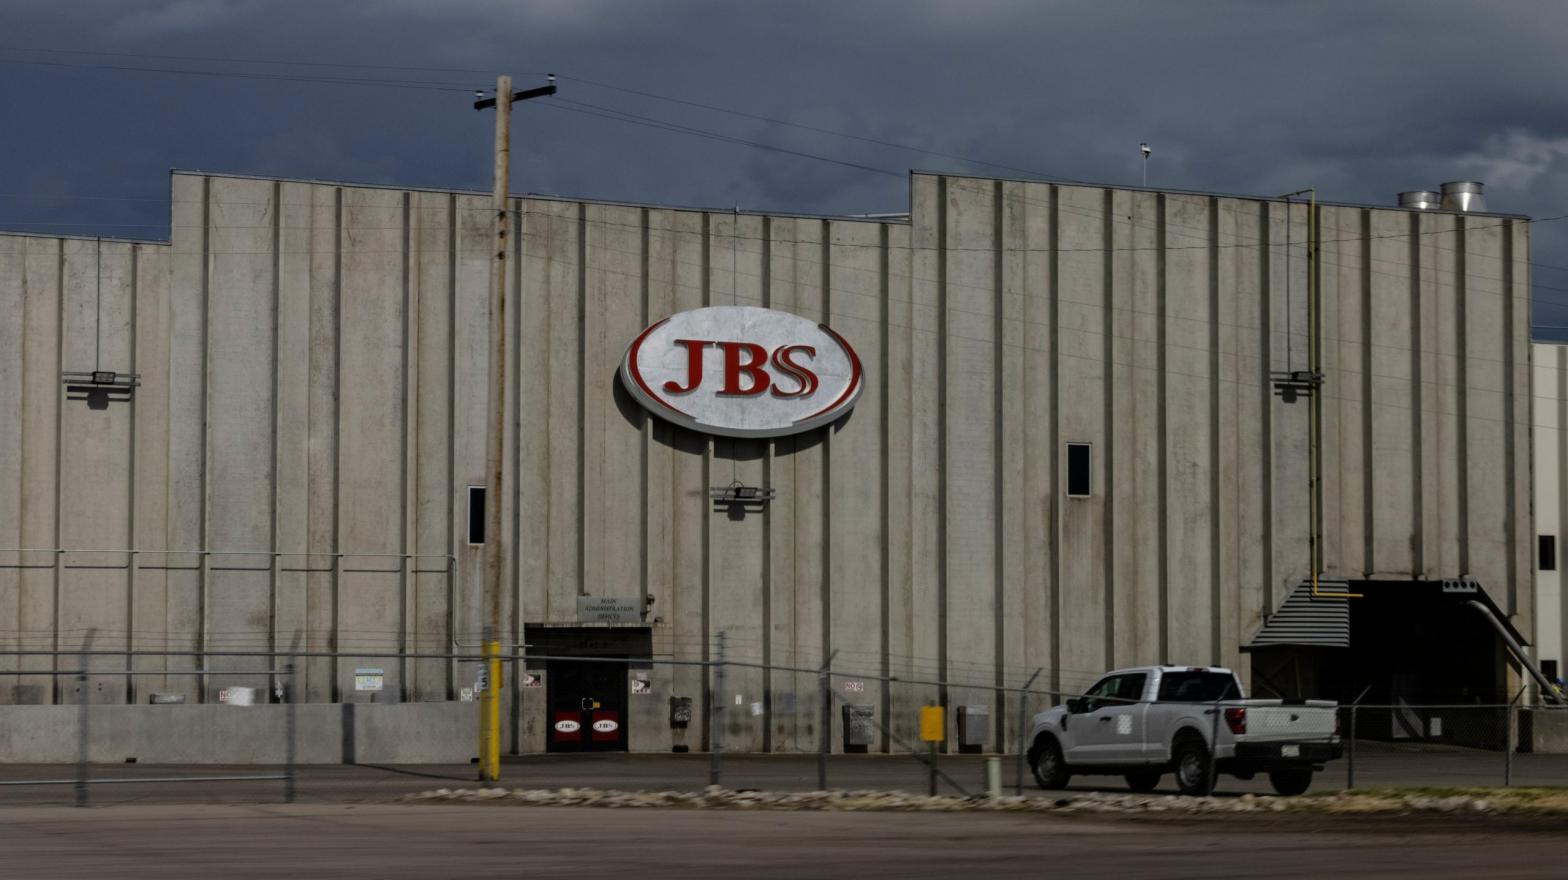 A JBS meat processing plant in Greeley, Colorado stands dormant after halting operations on June 1, 2021. (Photo: Chet Strange, Getty Images)